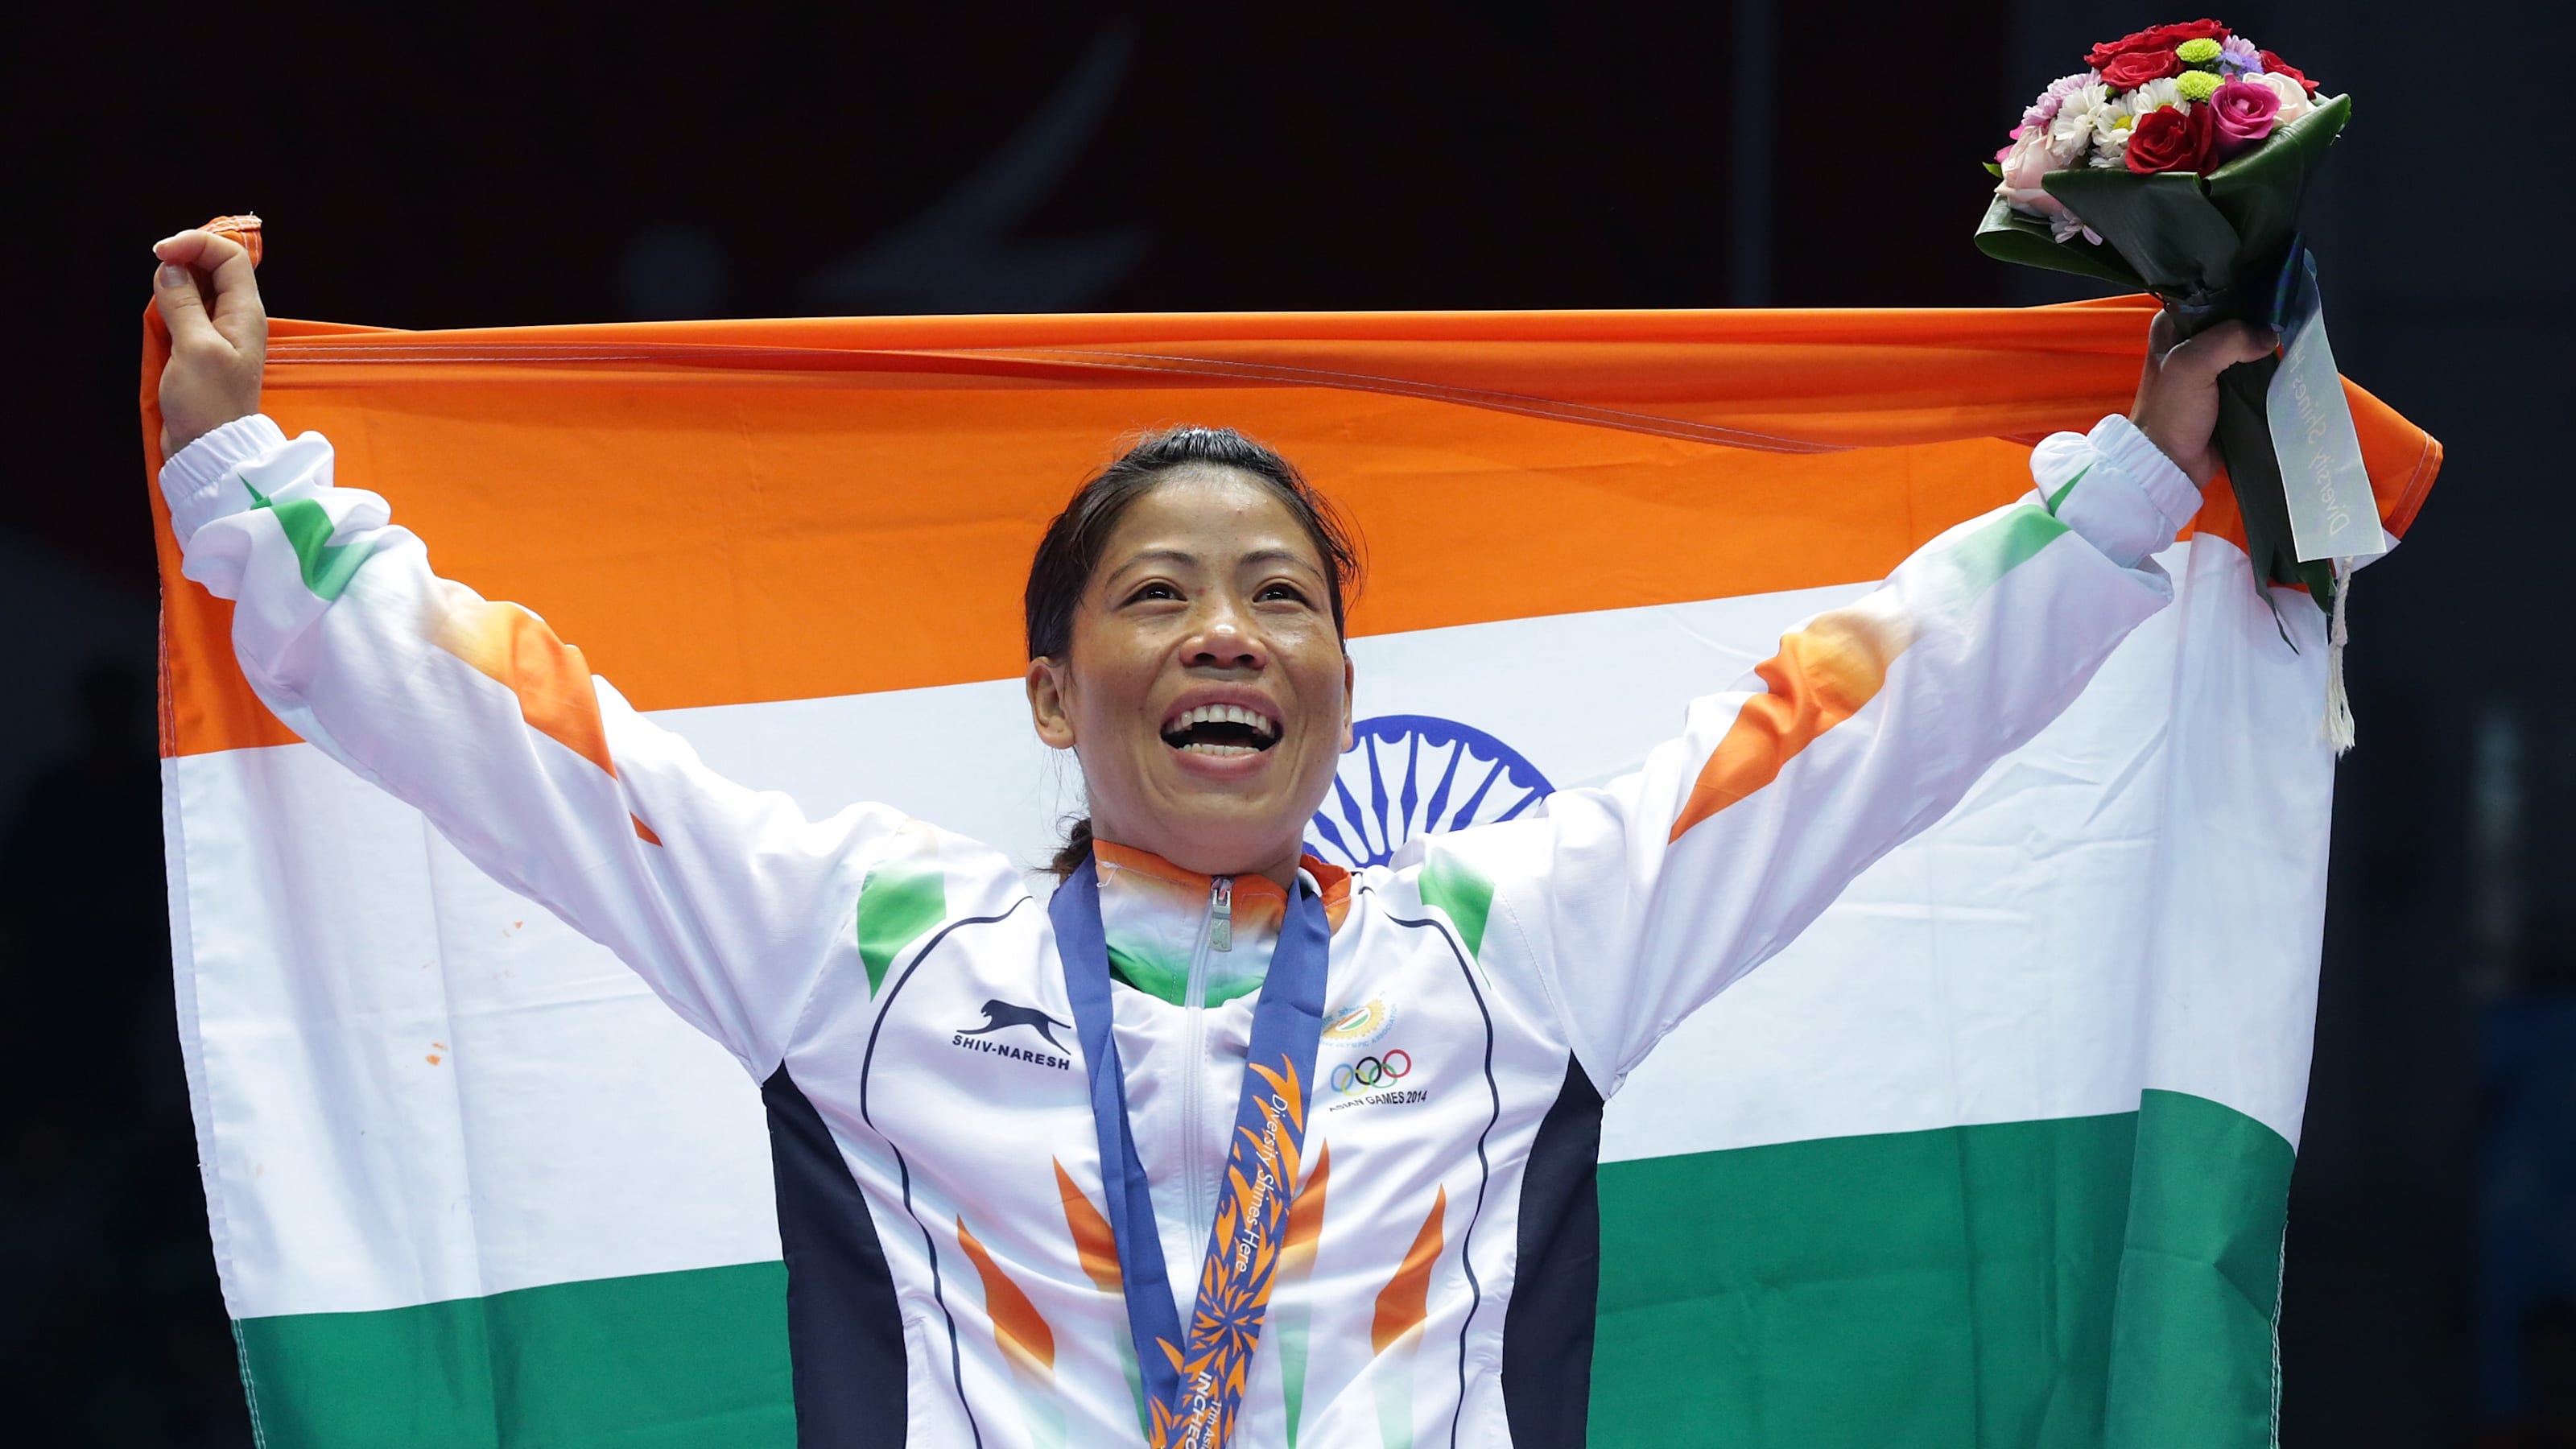 Mary Kom's Olympic medal: A bronze at London 2012 that changed her life